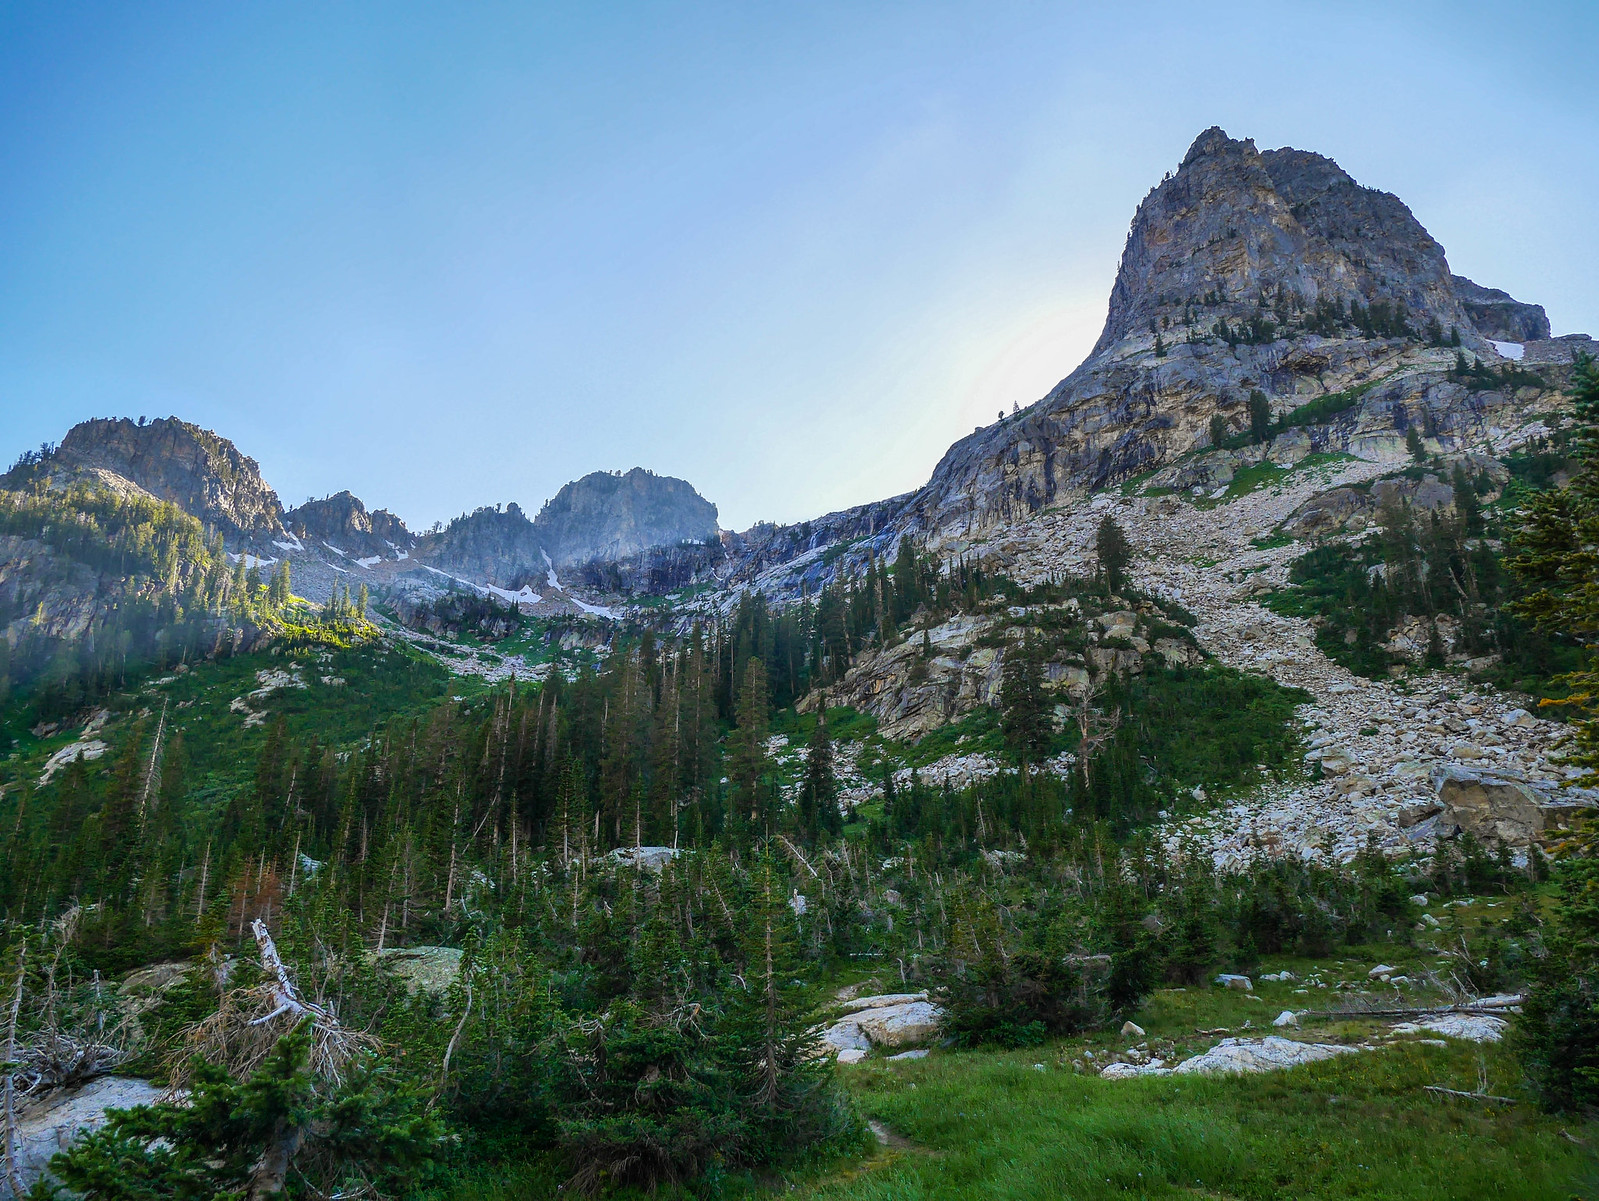 North Fork of Cascade Canyon